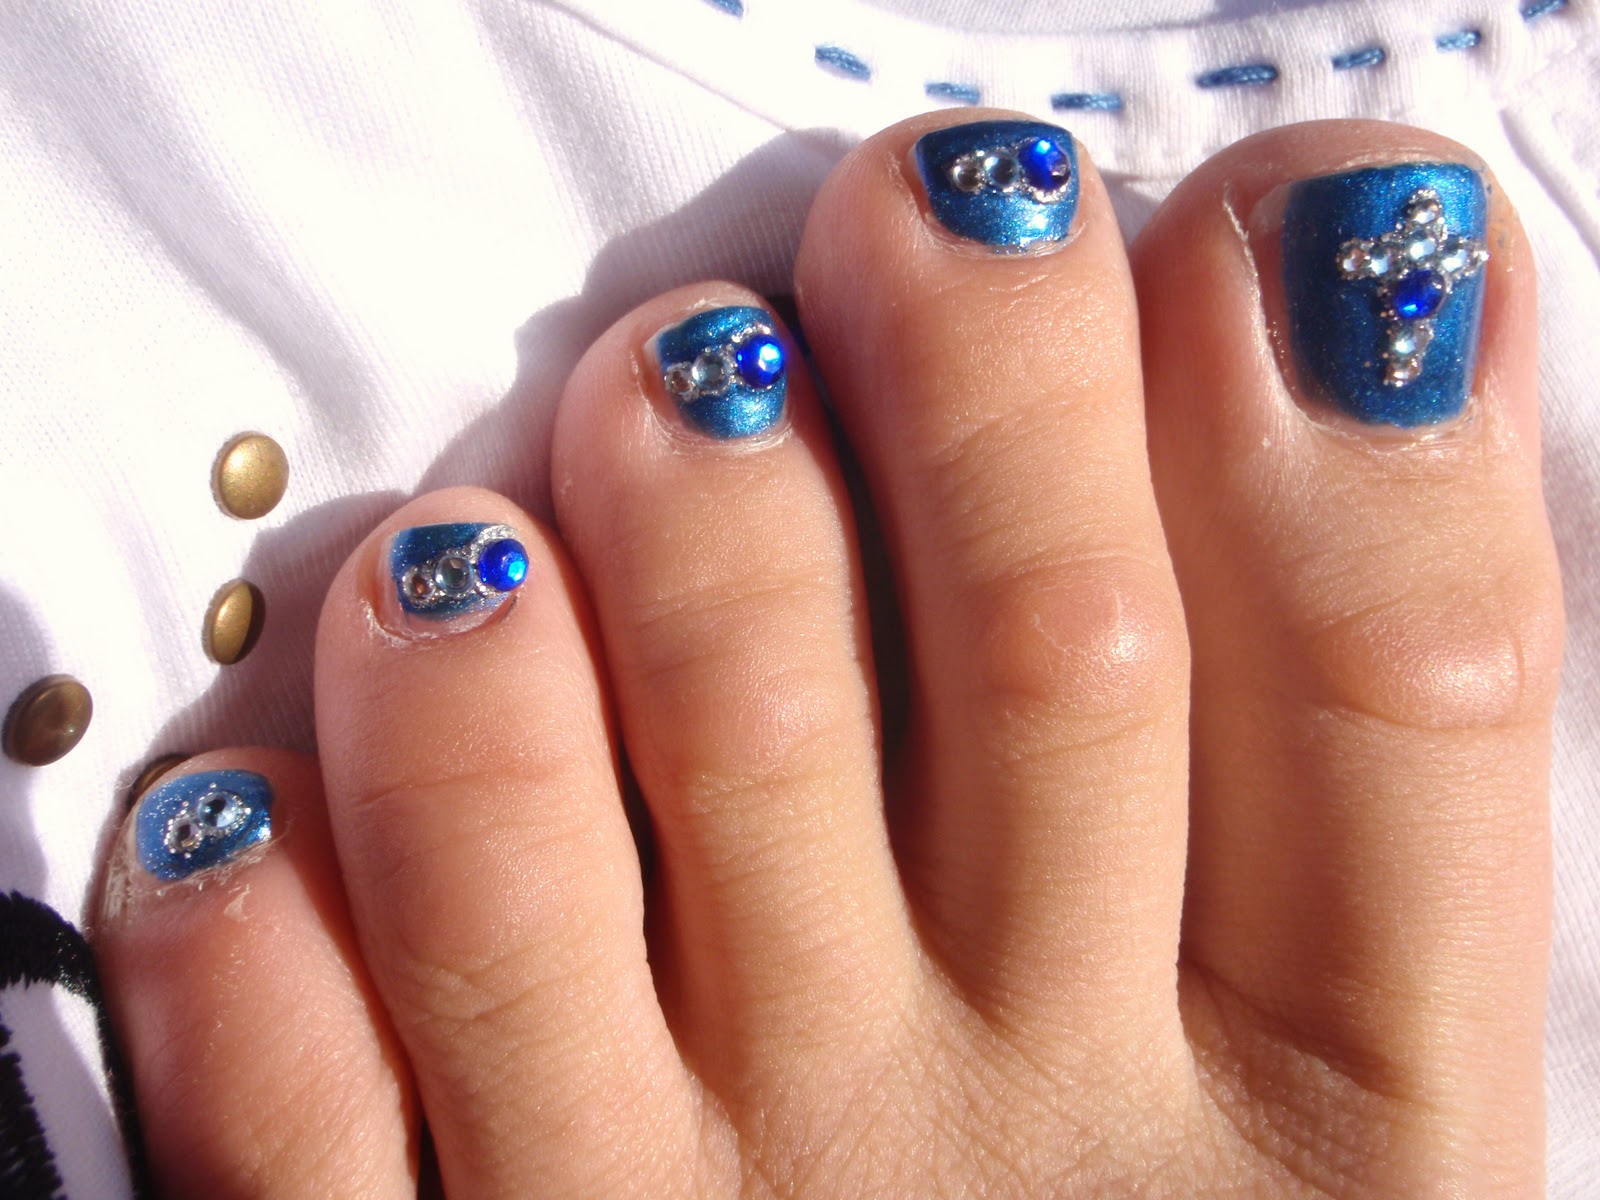 14 Easy Toe Nail Art Designs Images